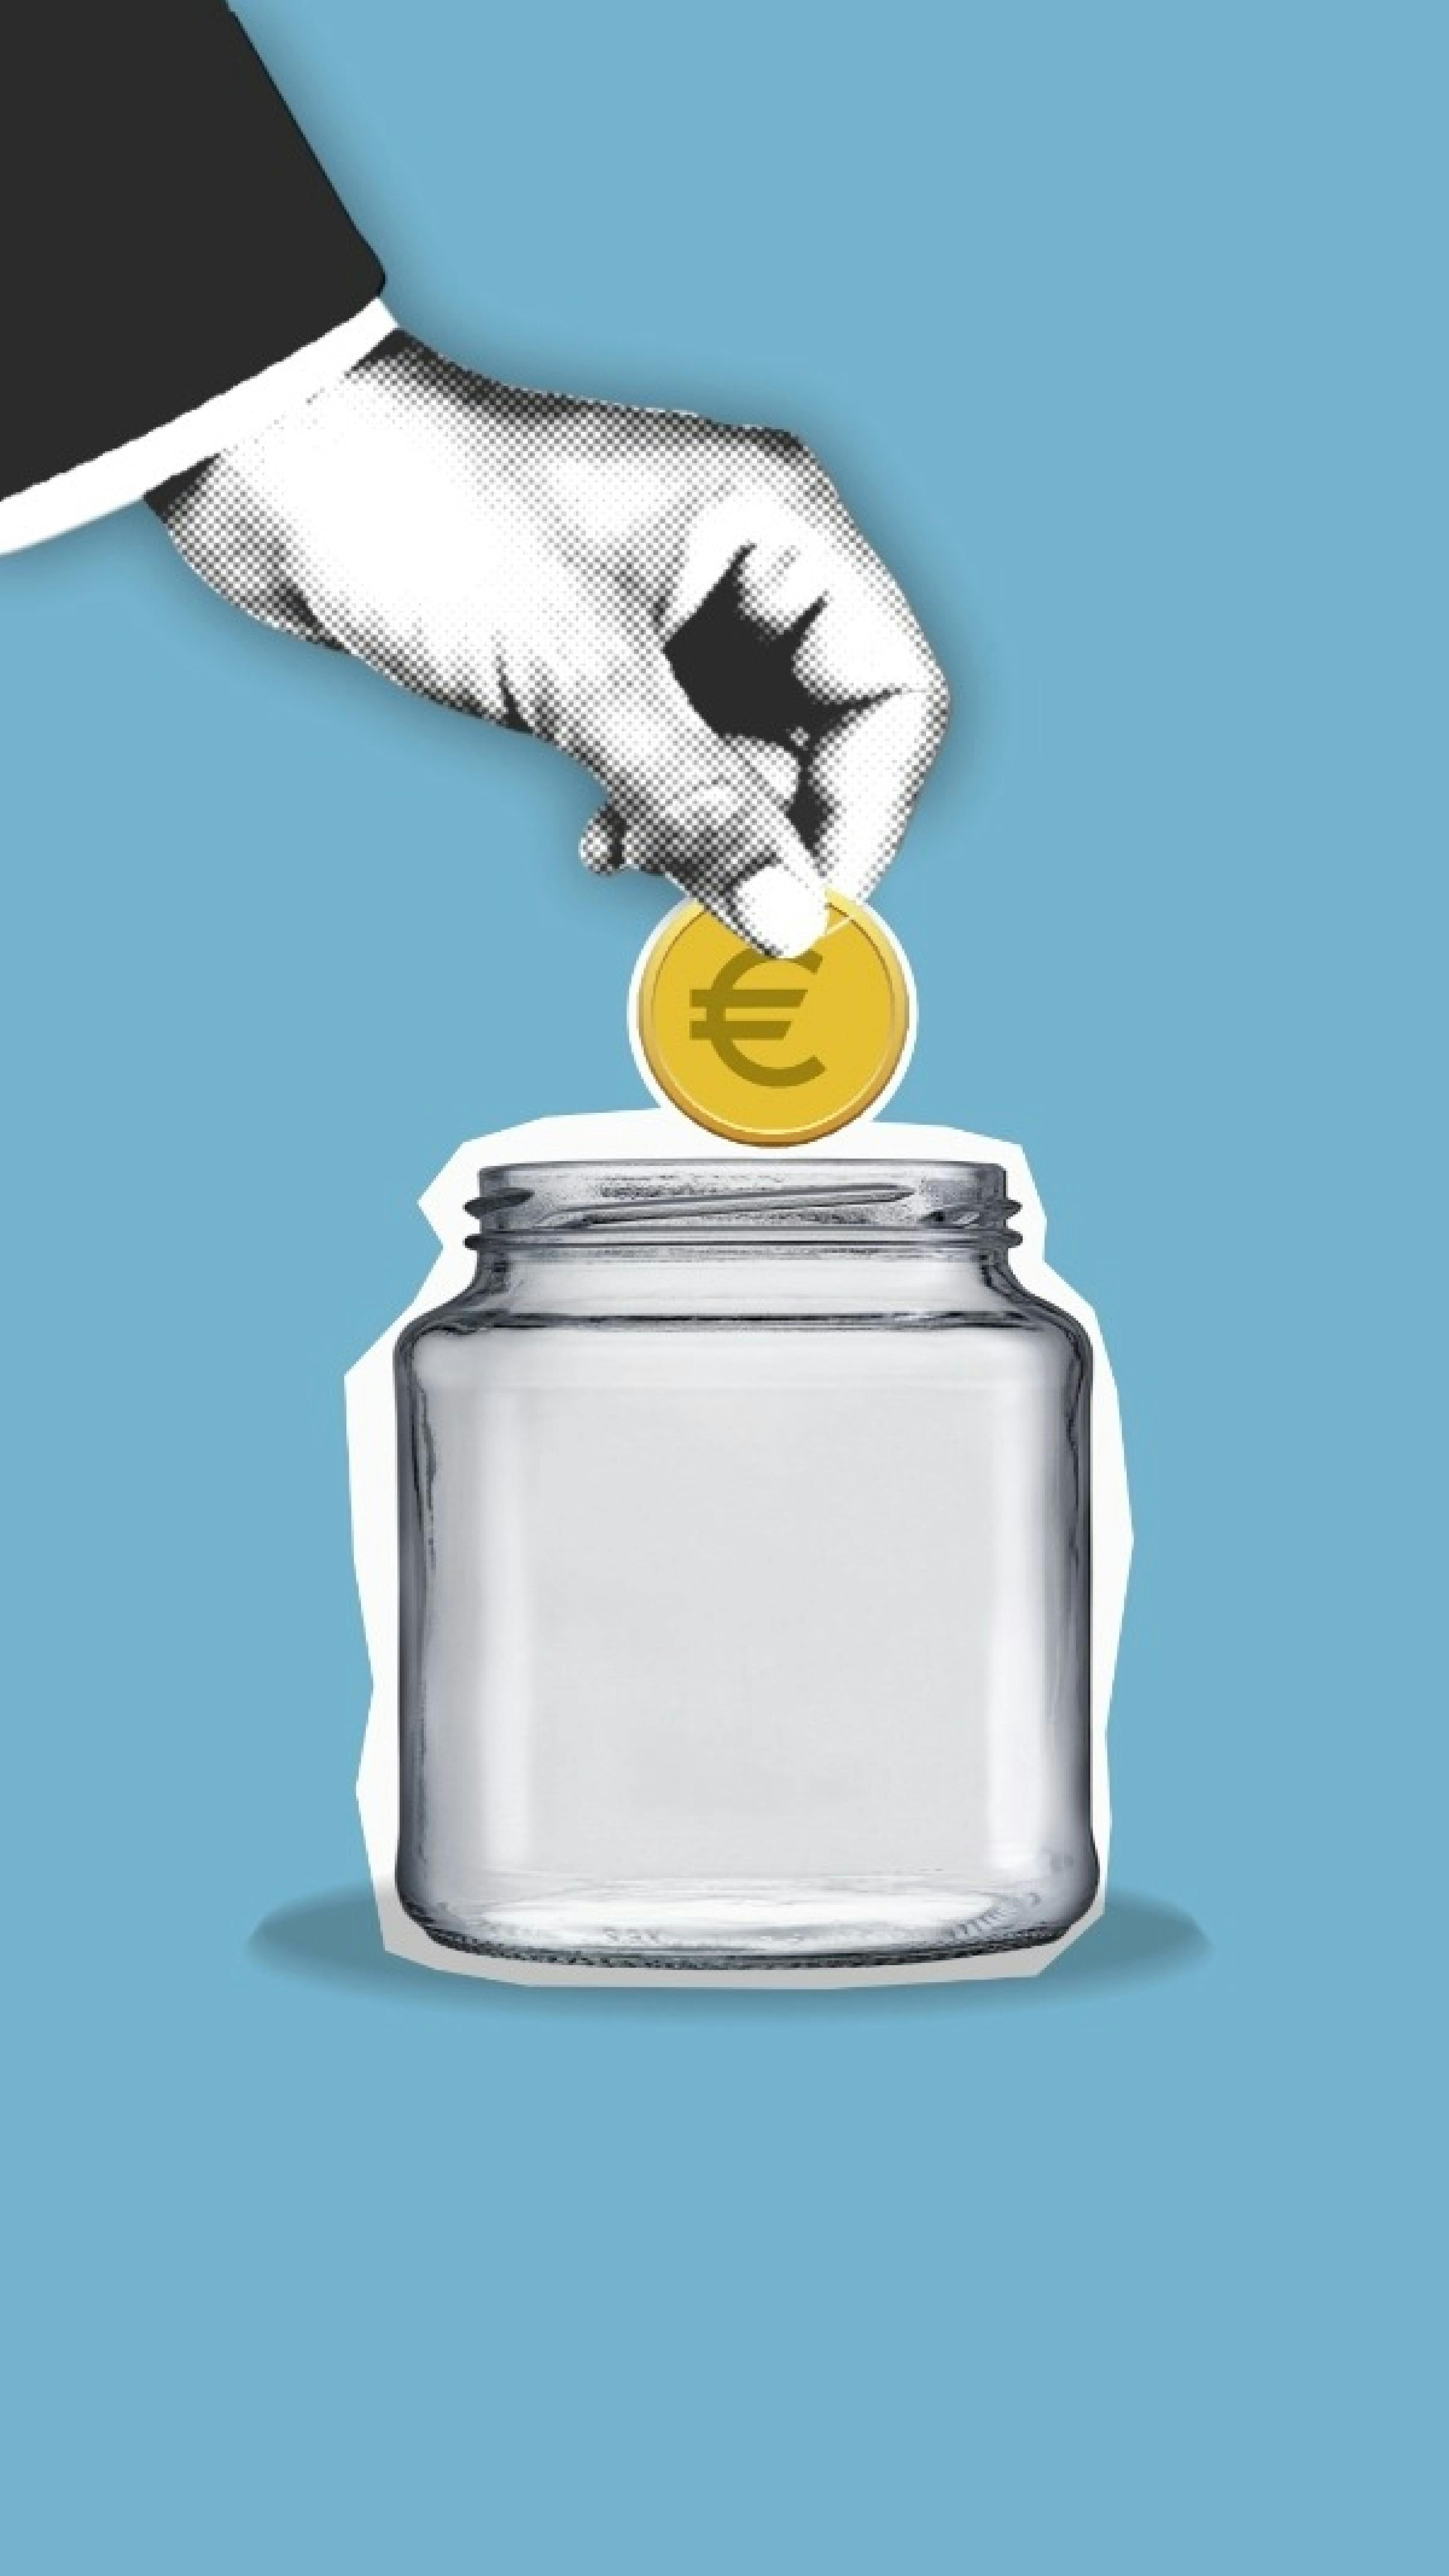 crop faceless person putting coin into glass jar